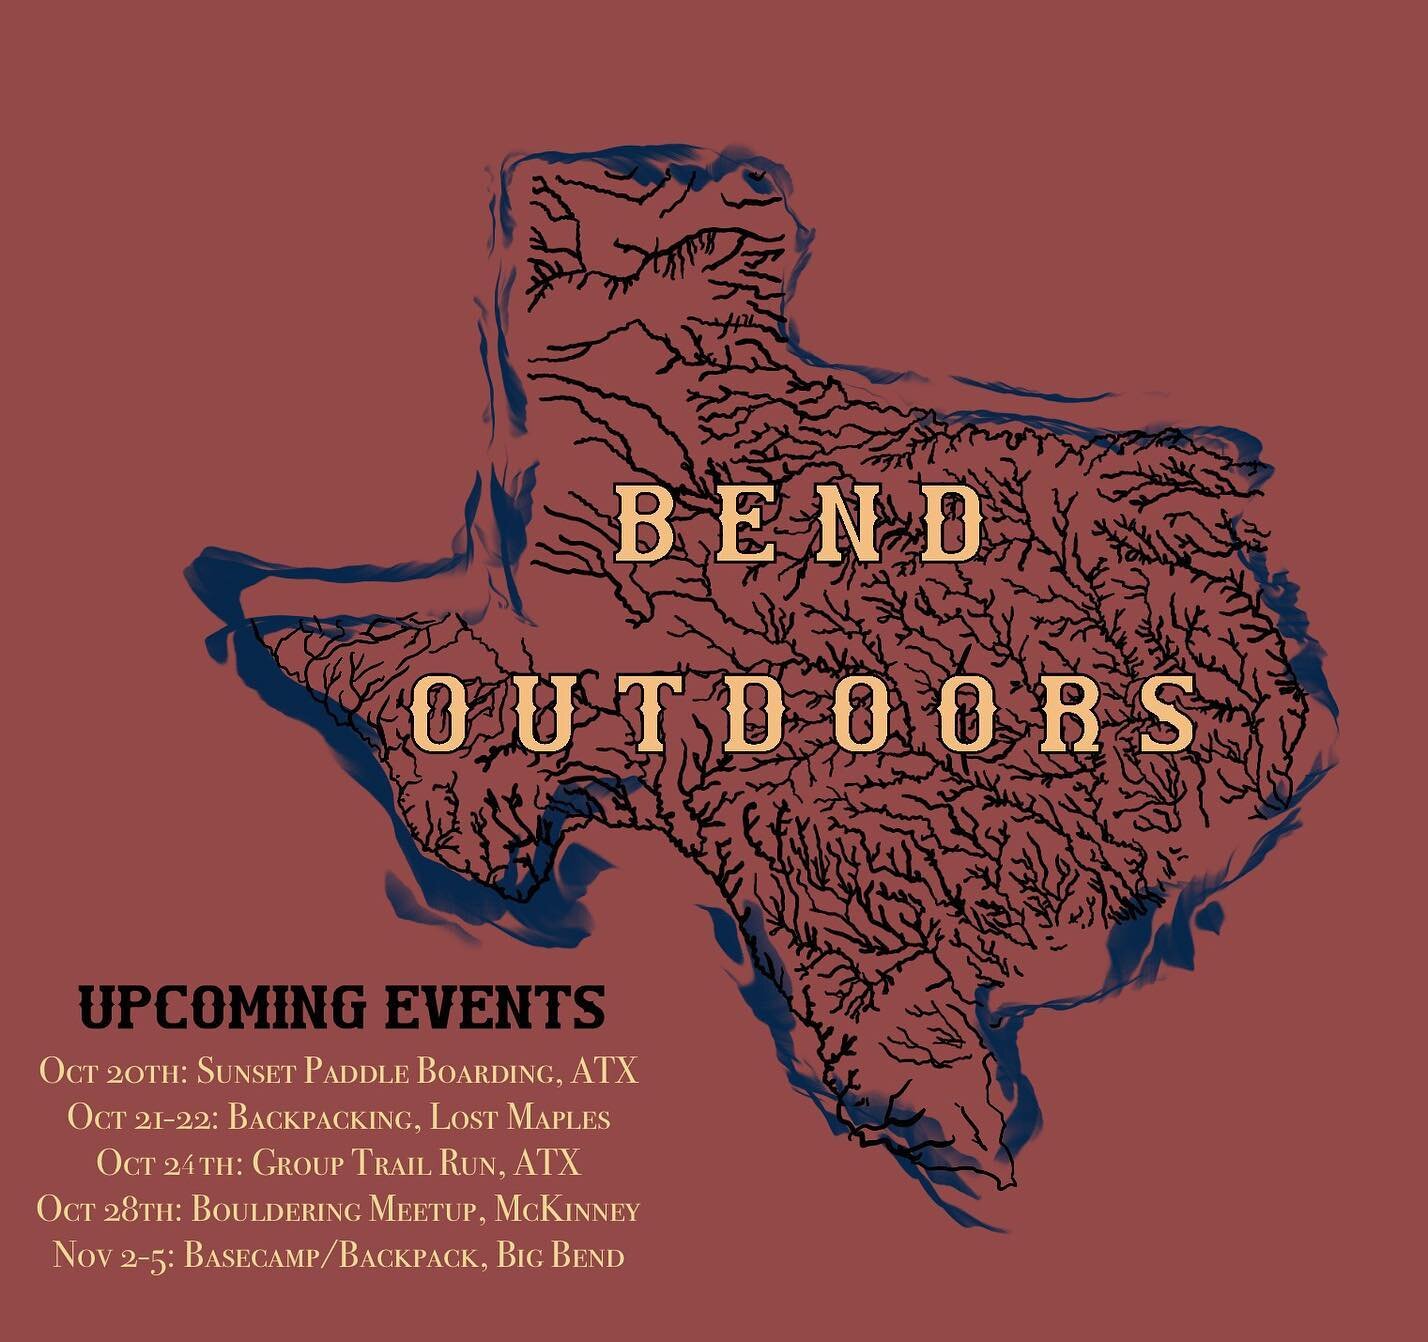 Introducing our local lineup. We set out to put together a variety of events for people to get outside.

As we patiently wait for our permits to finalize, our focal point will be having more &ldquo;meetups&rdquo; where people can freely show up and g